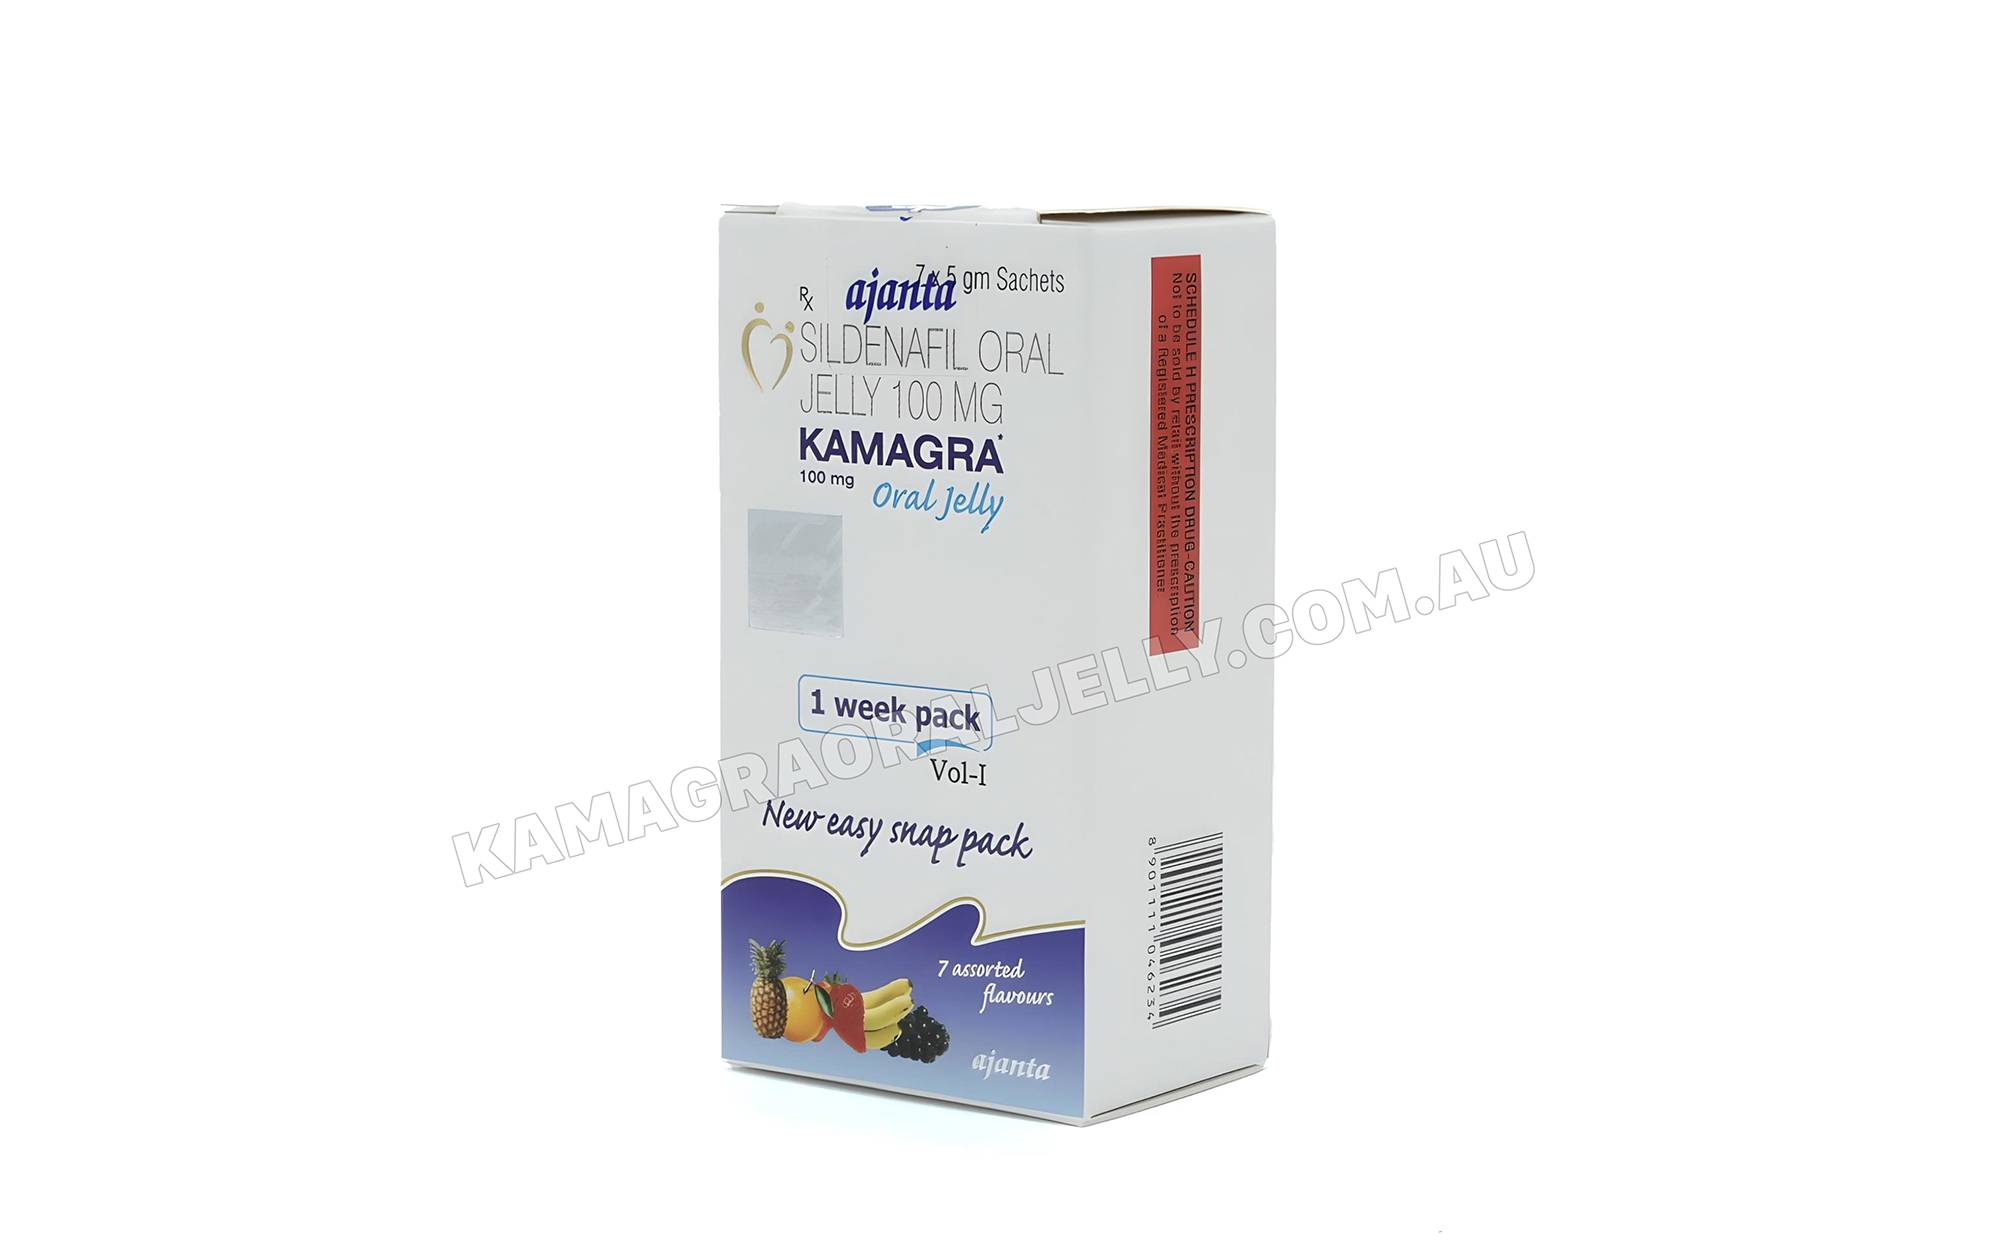 Where to buy Kamagra Oral Jelly?